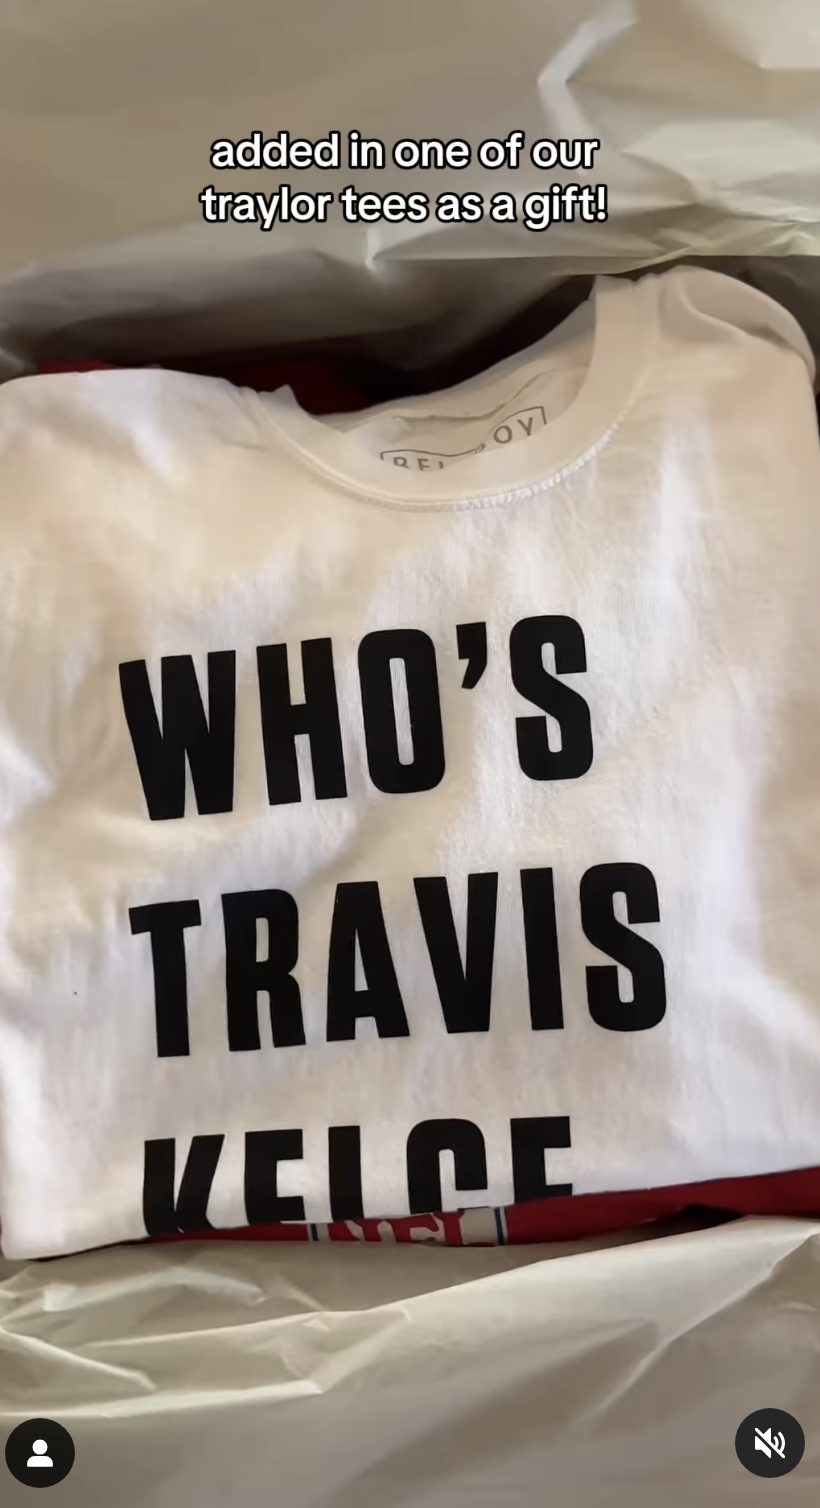 A shirt that says "Who's Travis Kelce?"